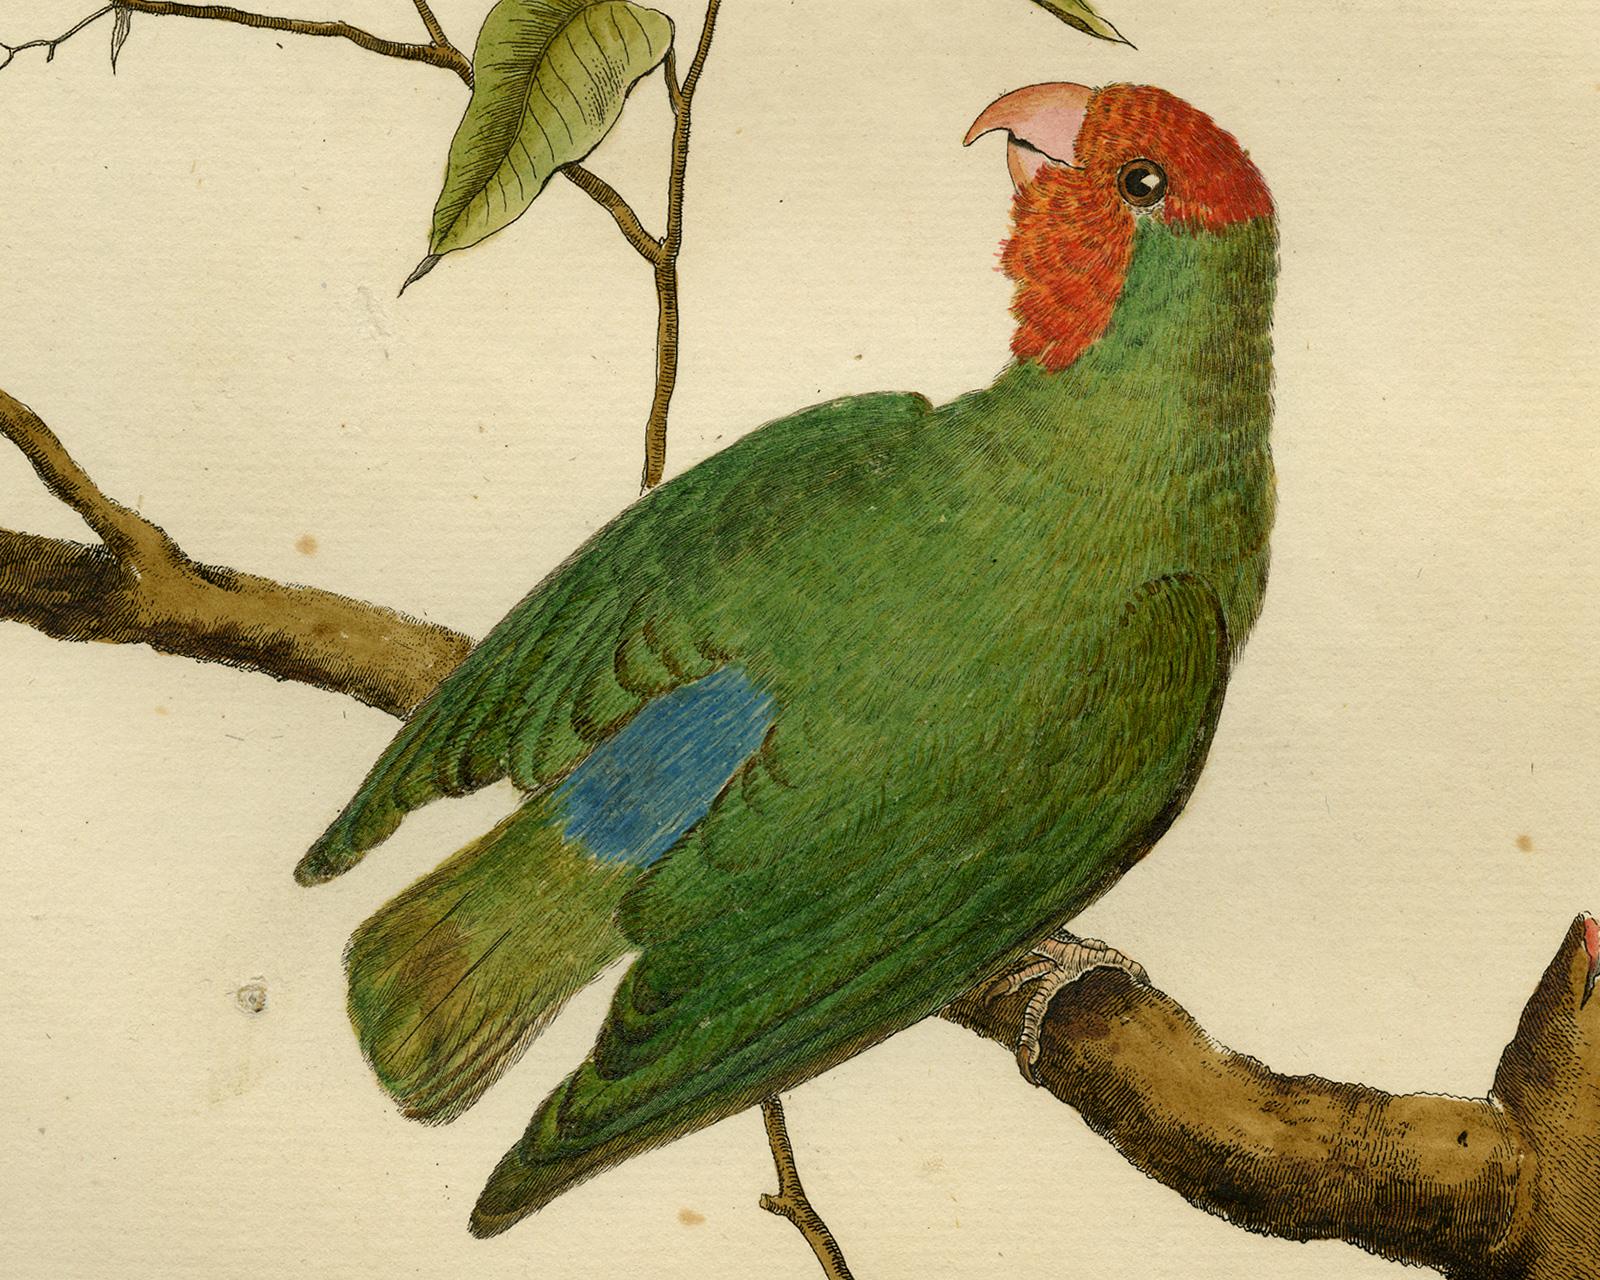 Small Parakeet from Guinea by Martinet - Handcoloured engraving - 18th century - Old Masters Print by Francois Nicolas Martinet